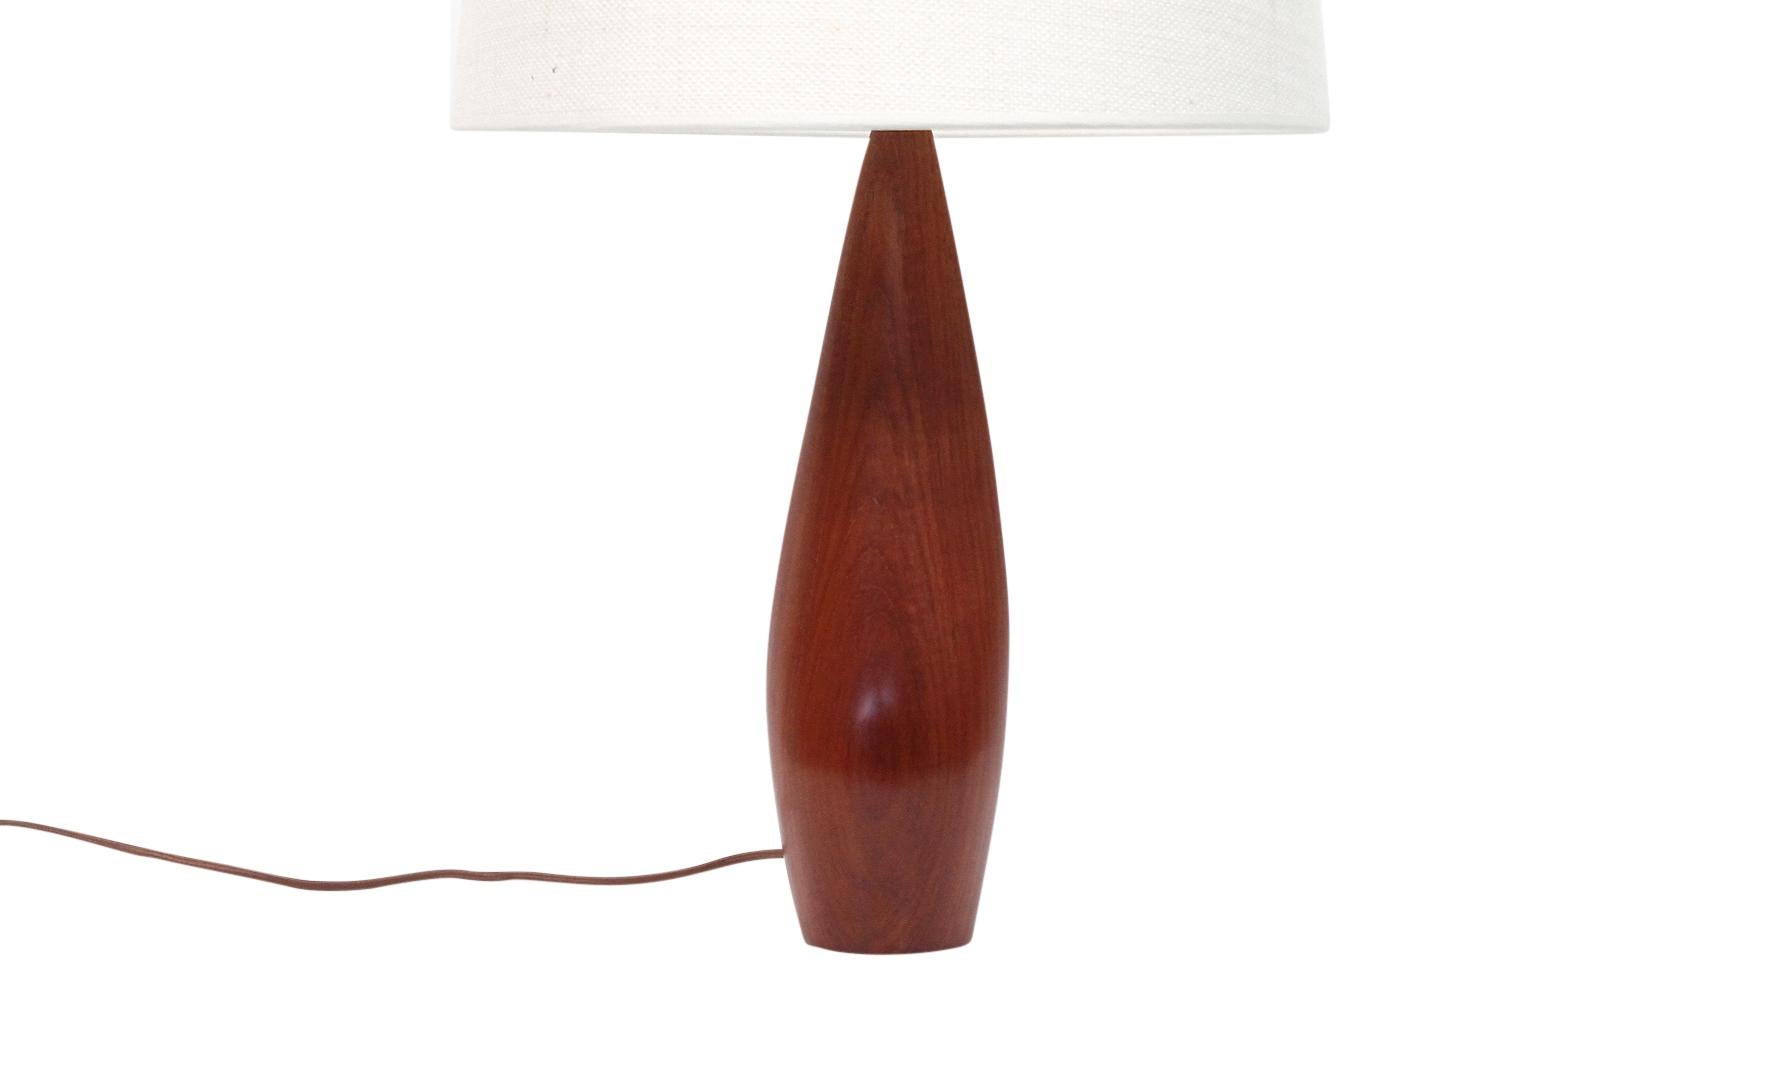 Rare pair of sculptural lamps carved from a single piece of solid teak by Danish designer Ernst Henriksen. Marked 